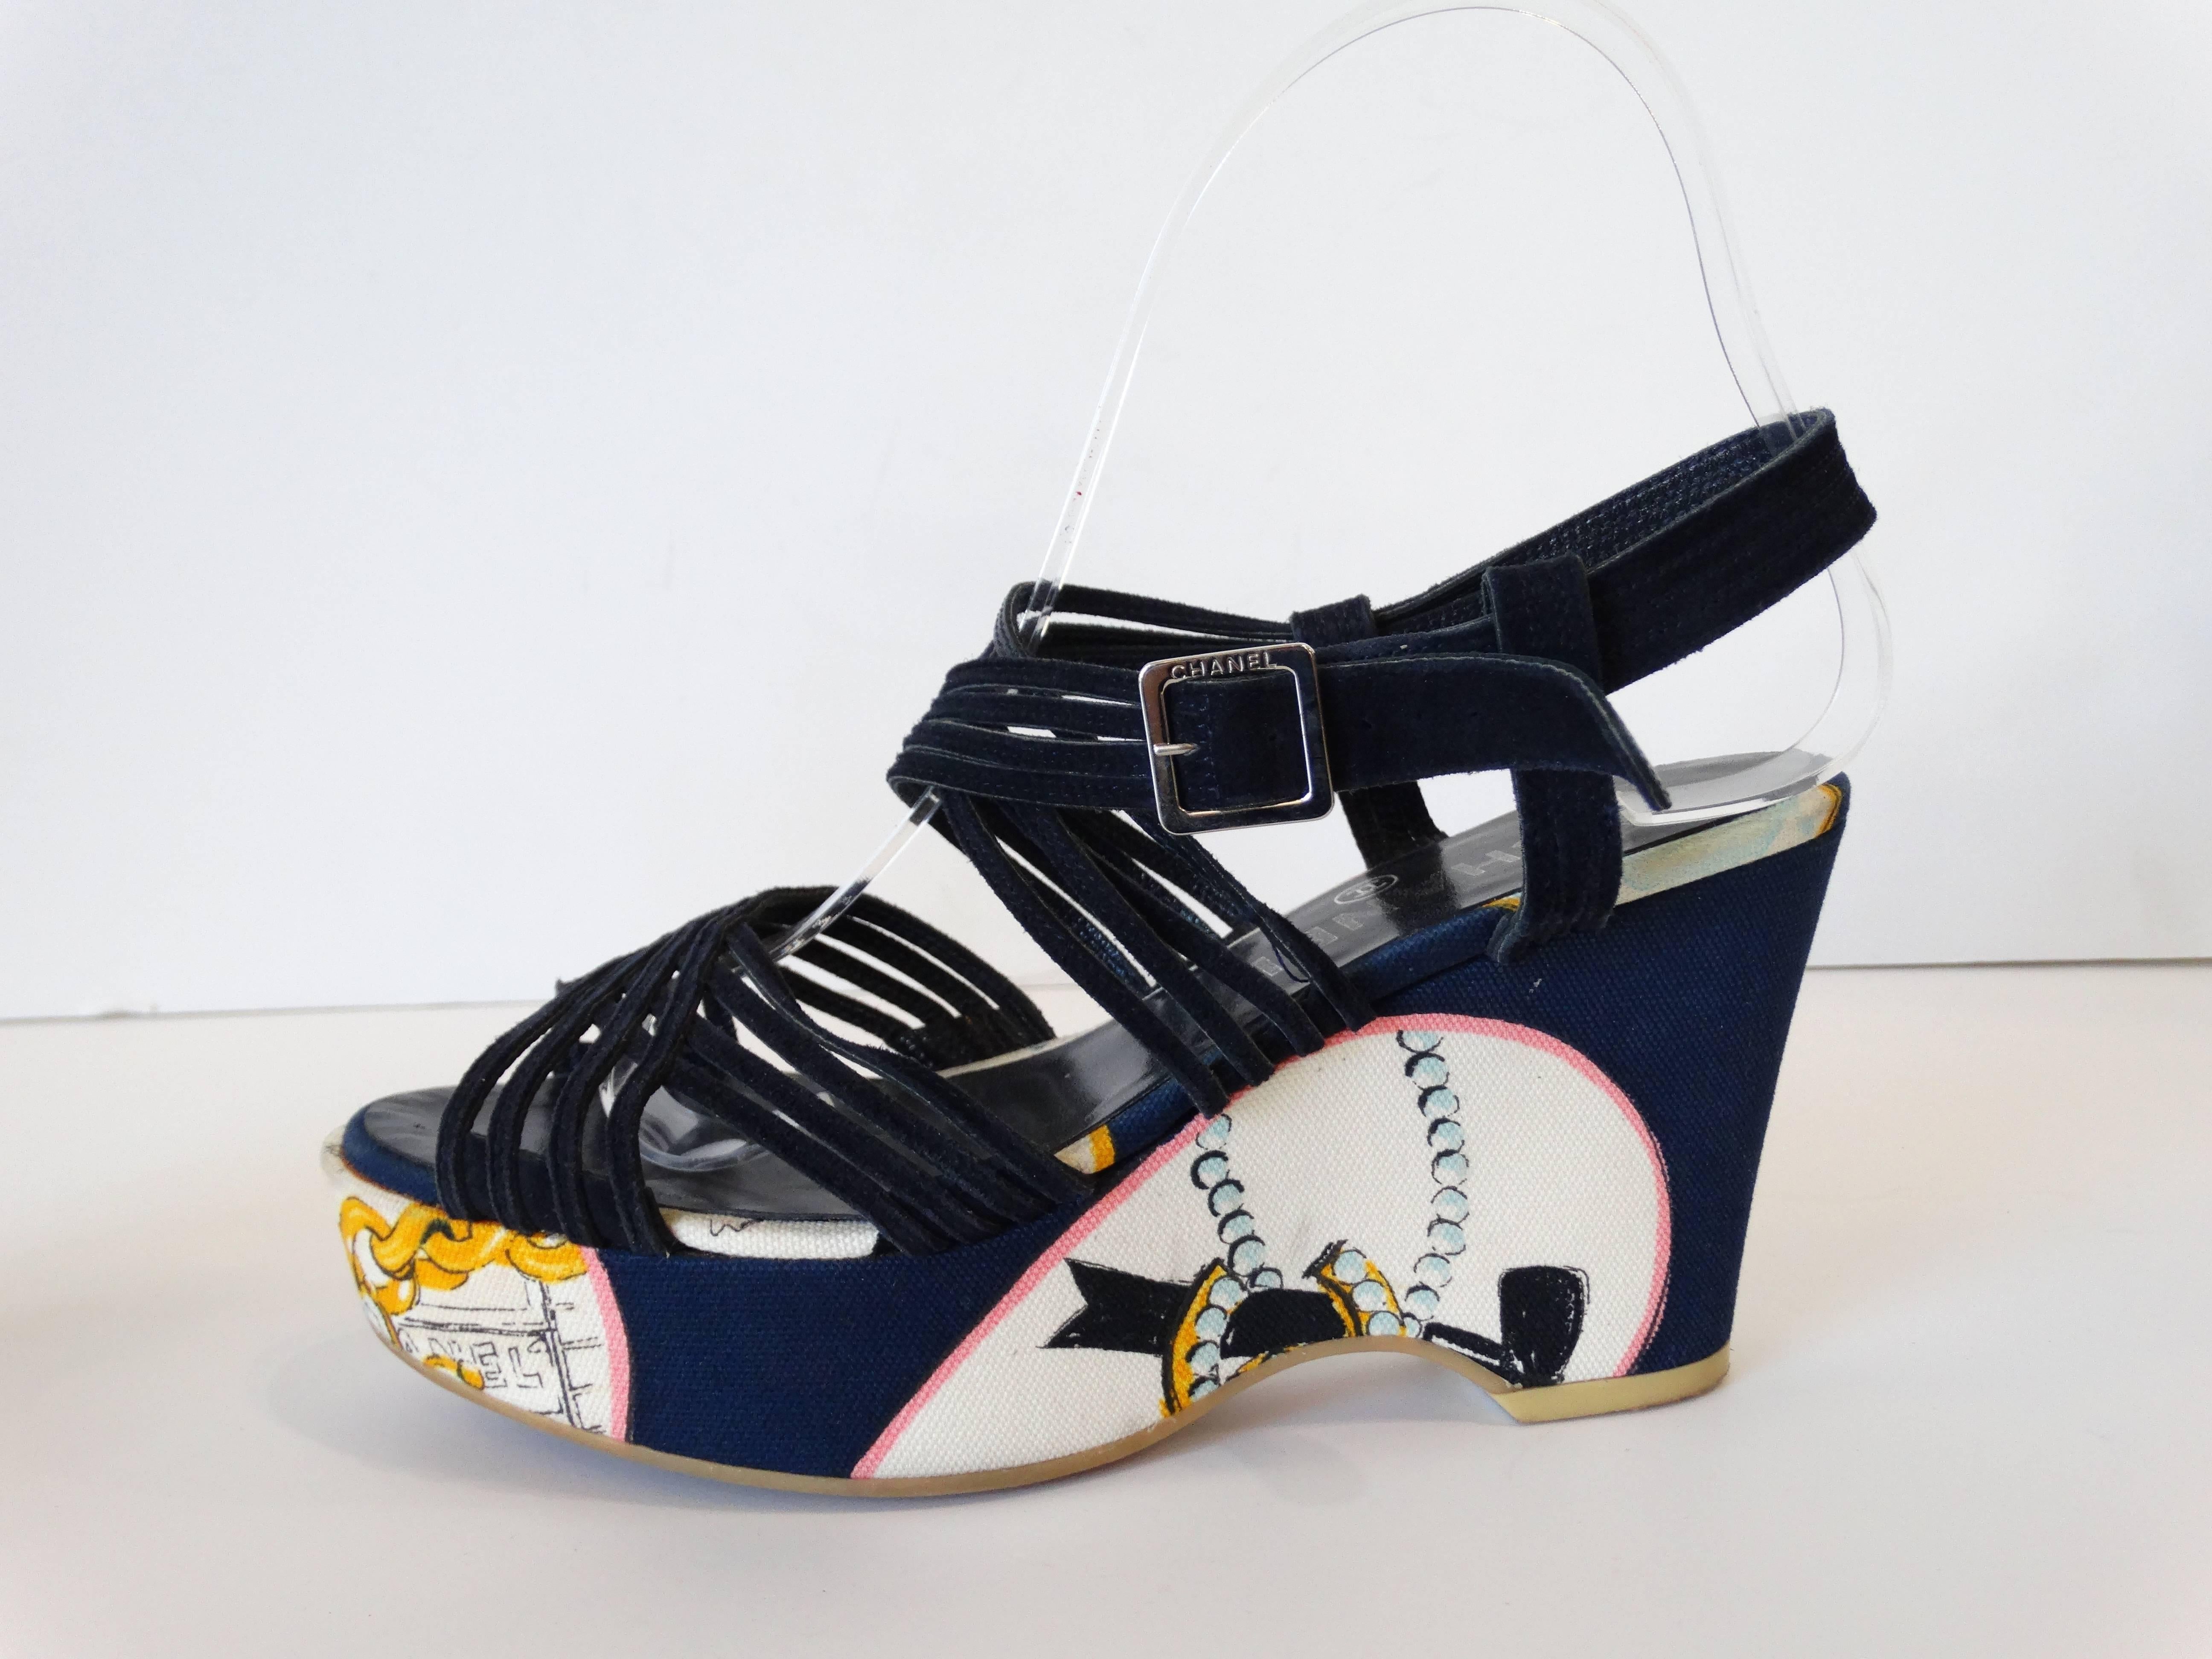 The perfect jet-setting wedges from iconic label Chanel! Deep midnight blue suede strappy construction with silver buckles at the ankle. Buckles signed with Chanel on the sides. Canvas print with Parisian motifs and classic Chanel chains, pearls and